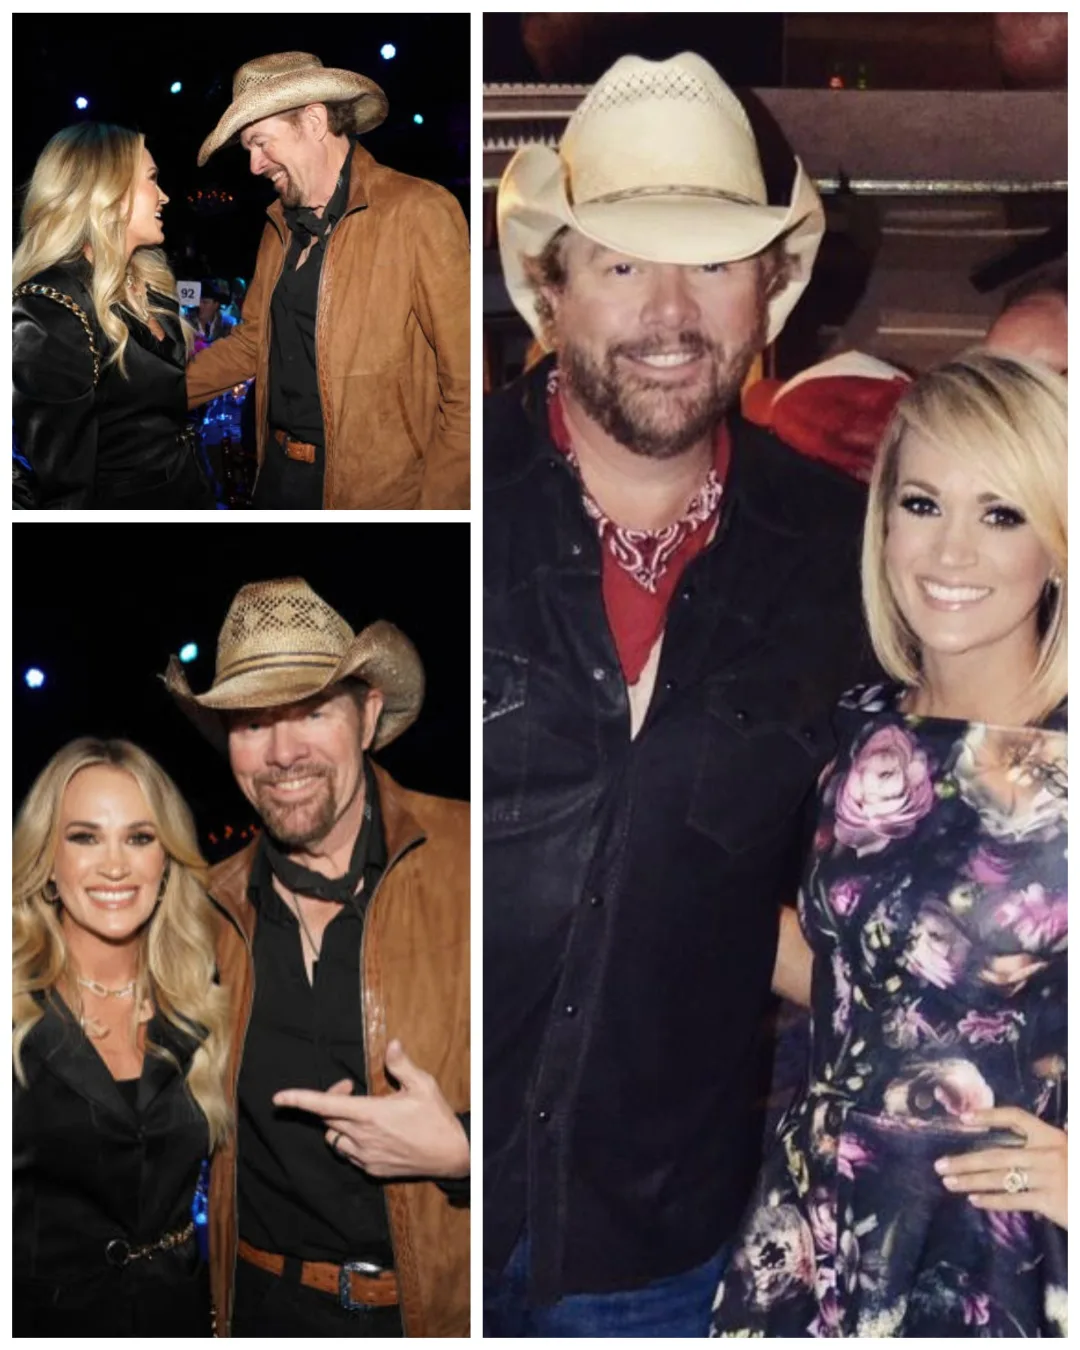 Carrie Underwood Honors Toby Keith In Powerful Tribute - Positius.com